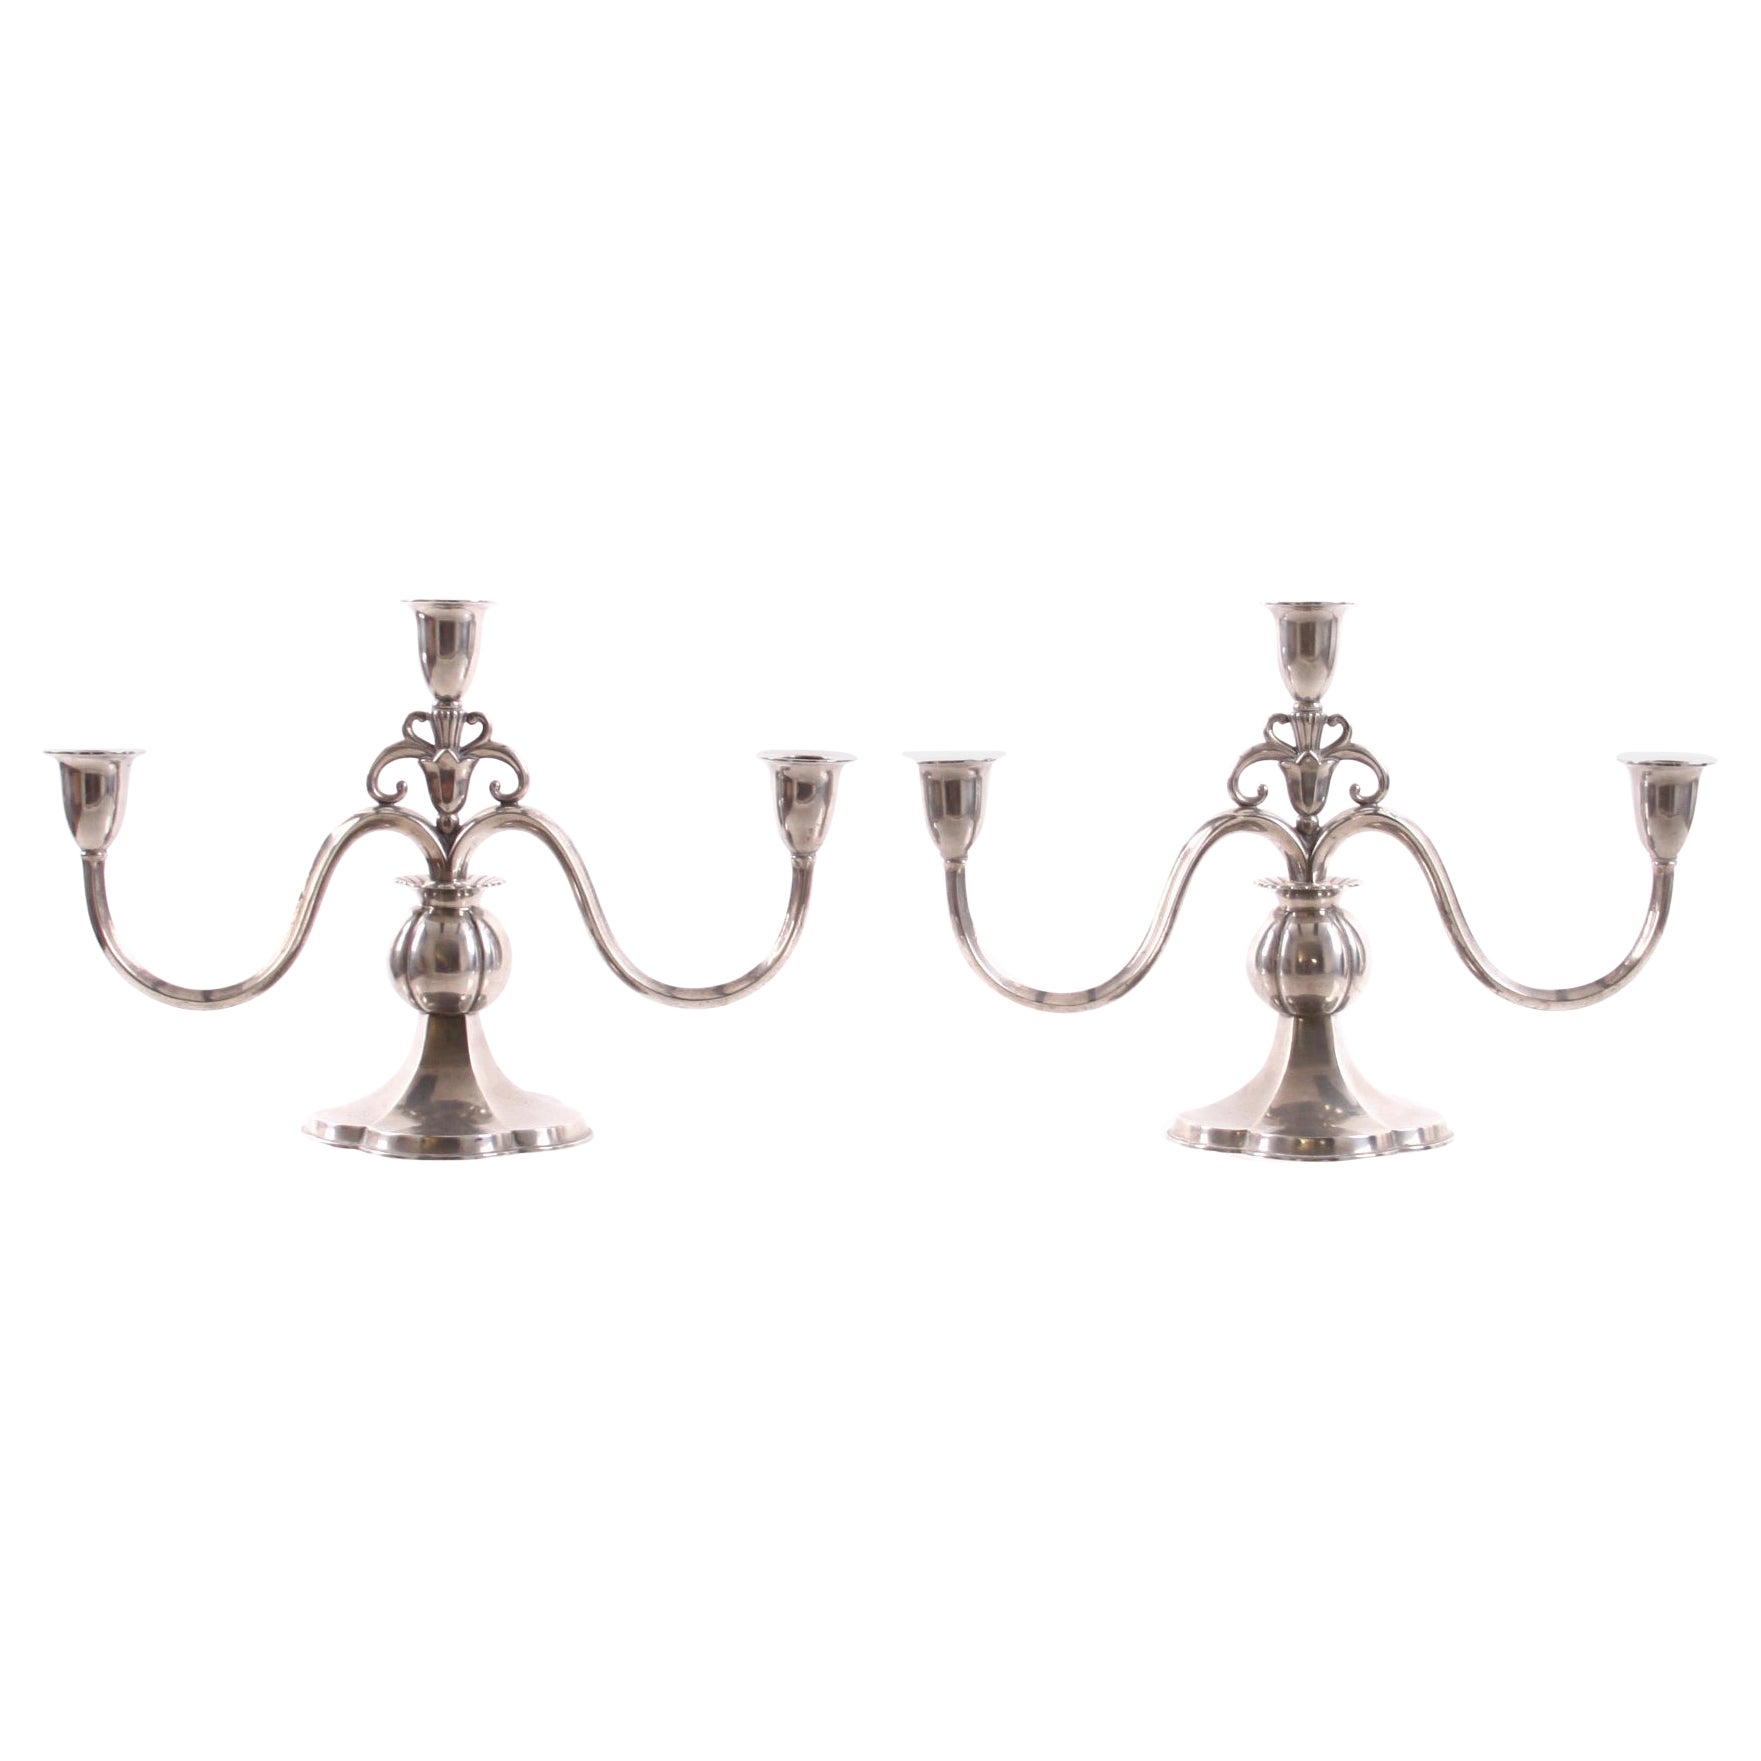 Rare Pair of Just Andersen Three Armed Candelabras, Pewter, Denmark 1930s For Sale